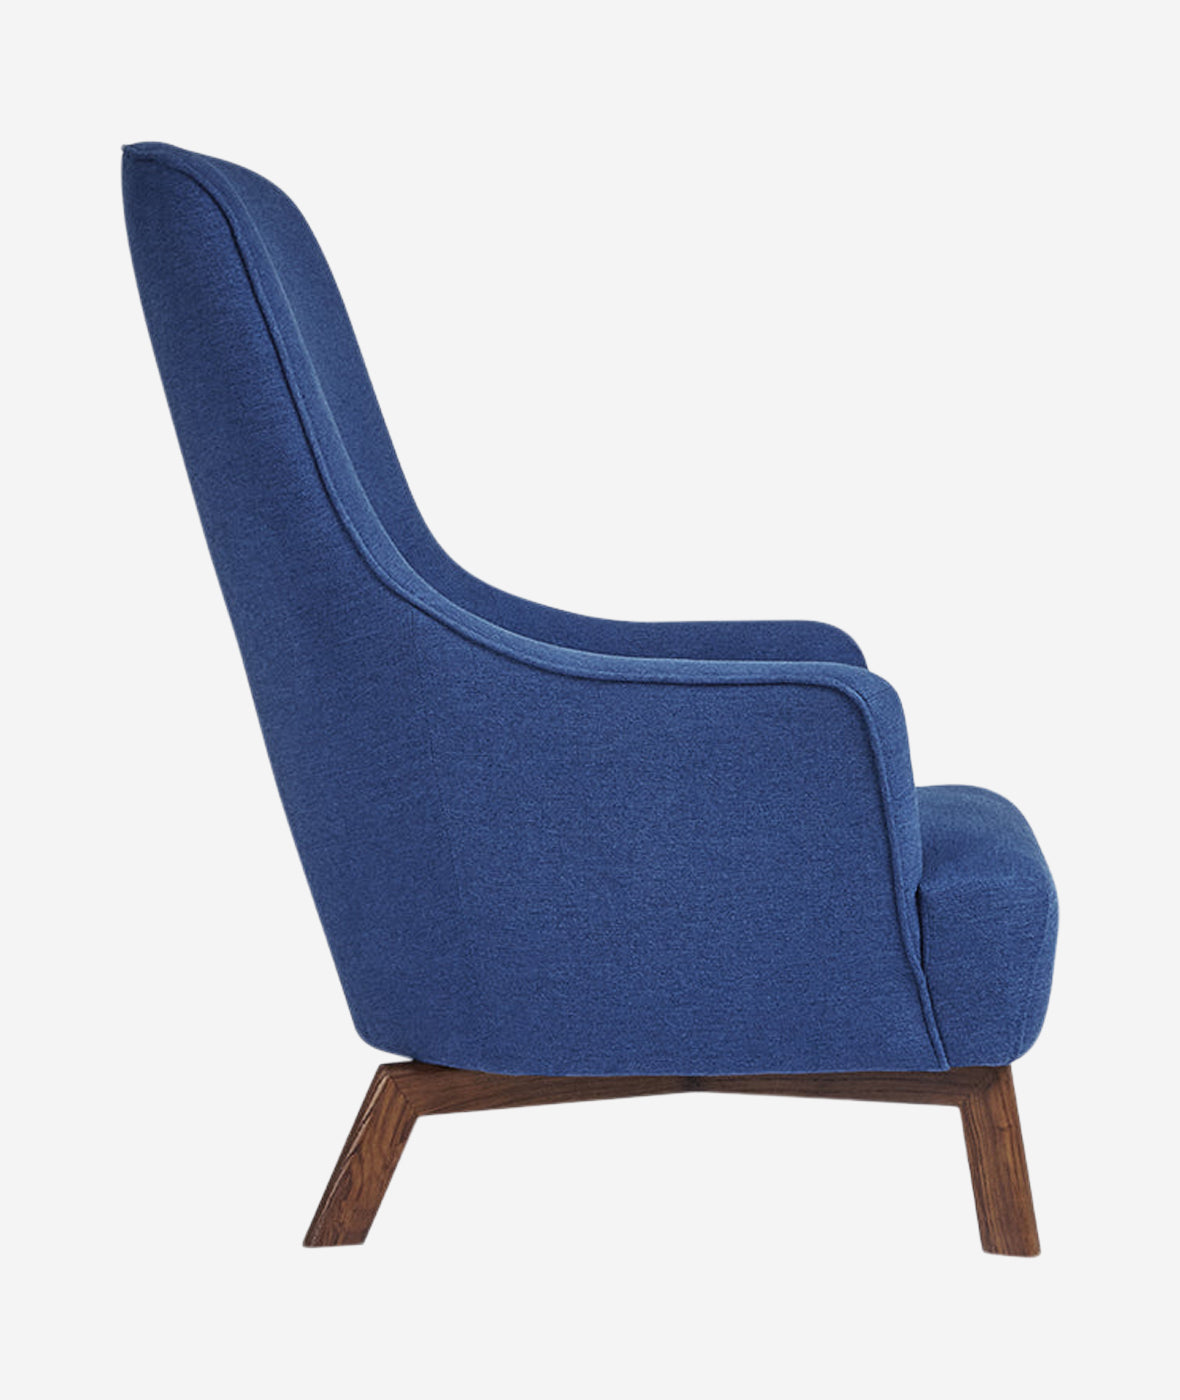 Hilary Chair - More Options